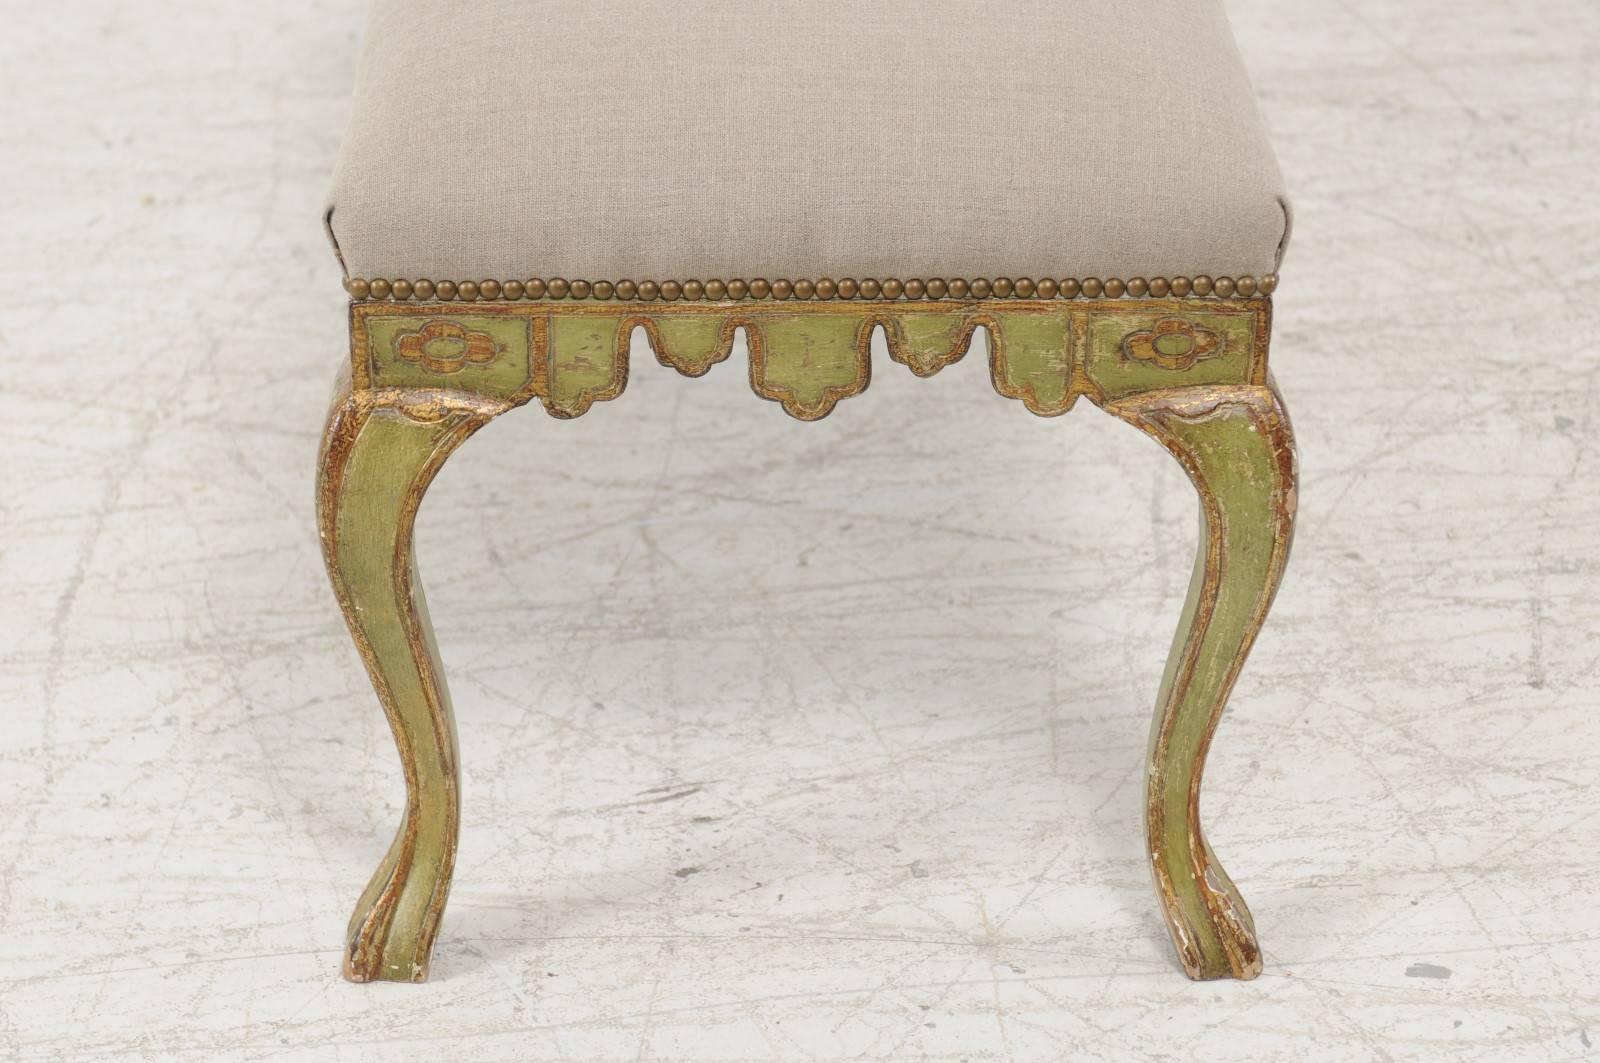 Wood 1930s Italian Rococo Style Painted and Upholstered Bench with Carved Apron